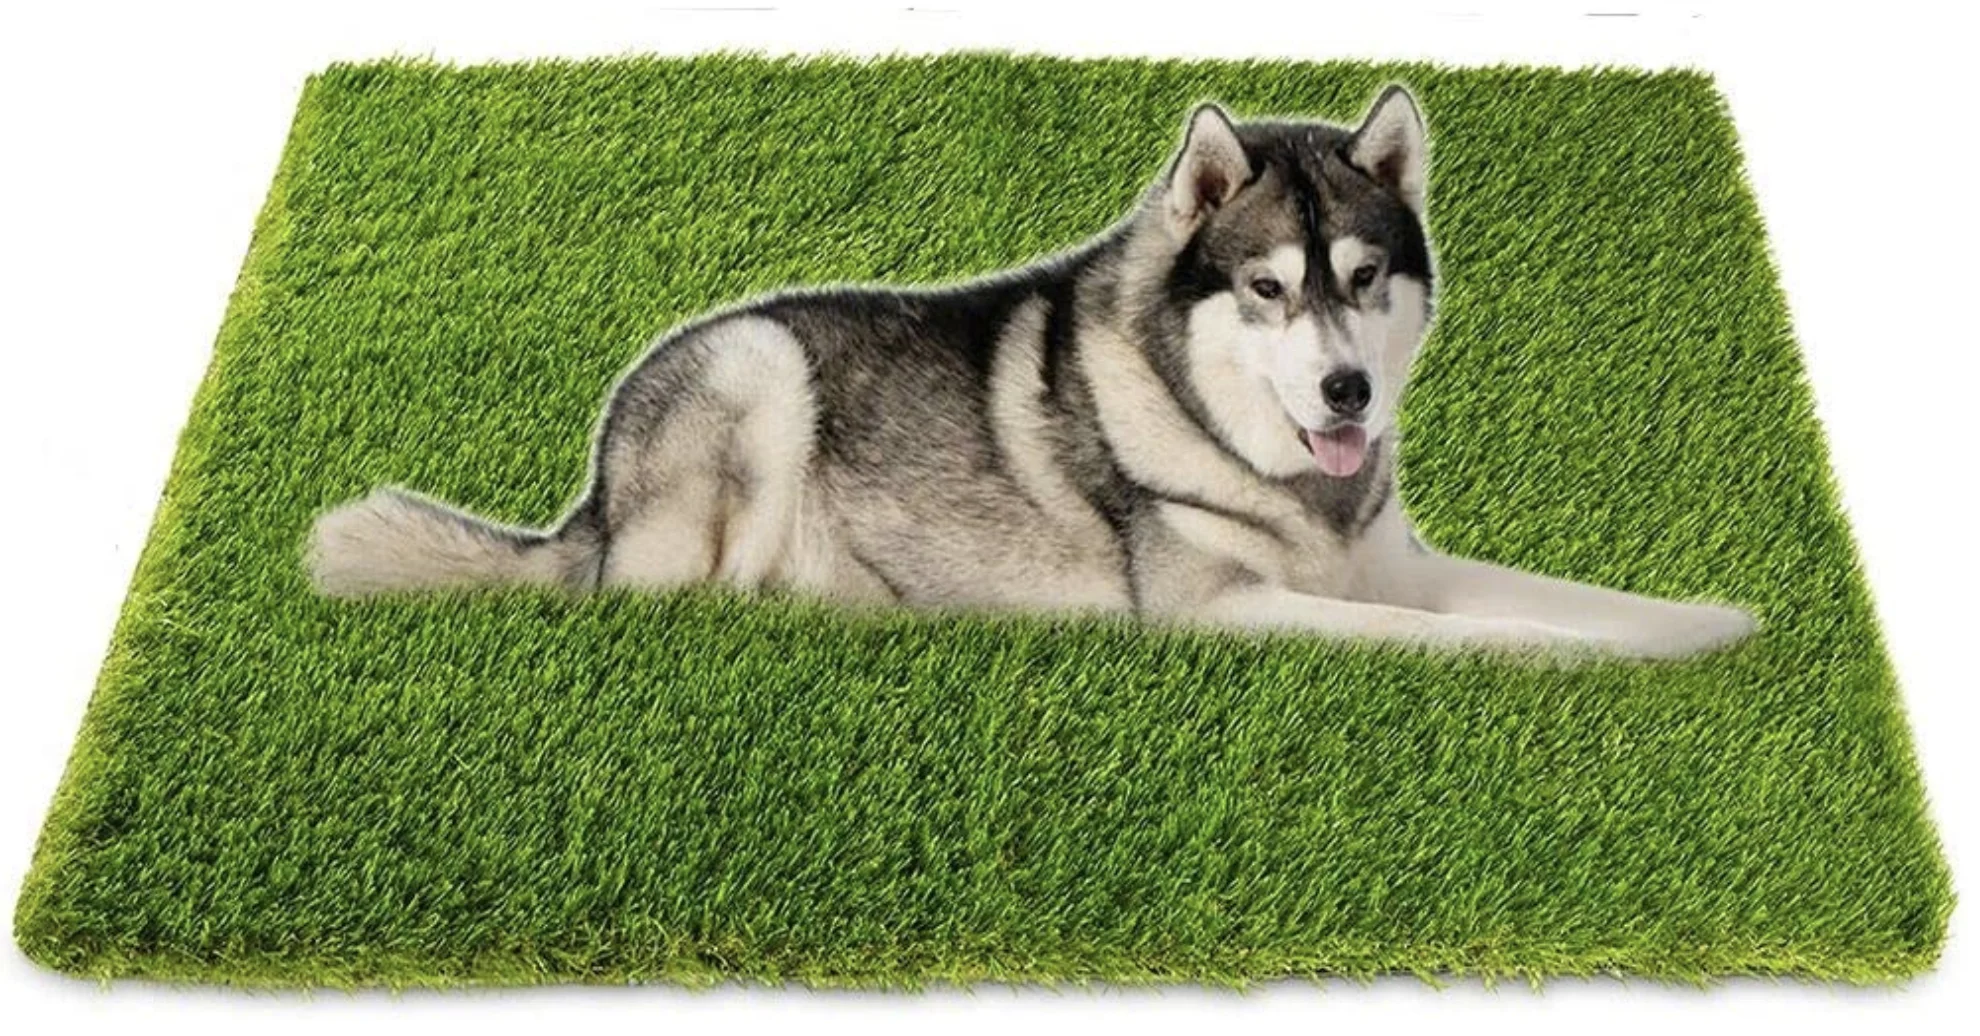 Factory Provides Artificial Grass Dog Grass Mat Potty Training Rug and Replacement Artificial Grass Turf